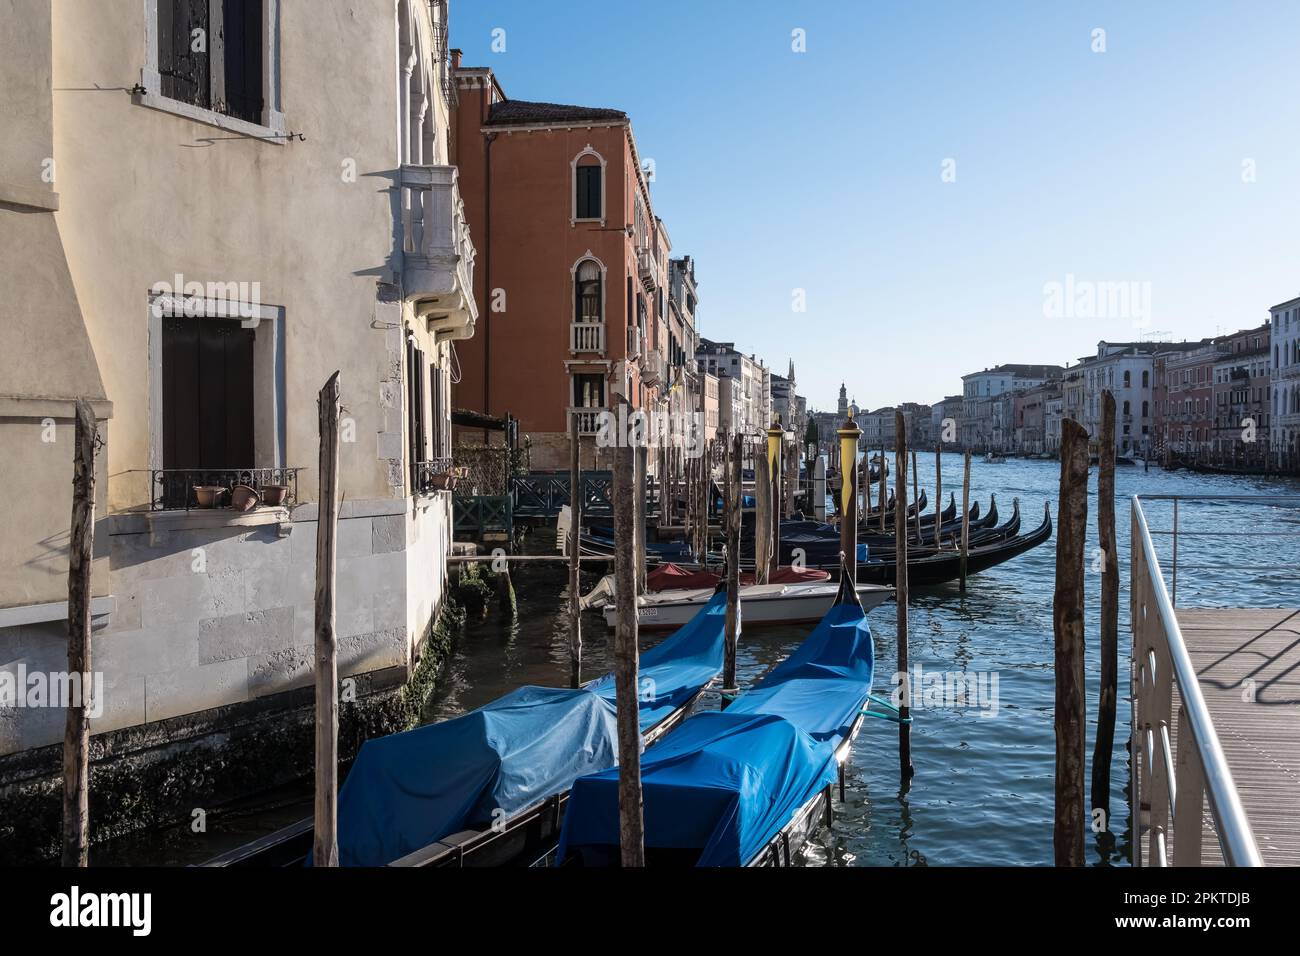 View of the Grand Canal, a channel in Venice, Italy, that forms one of the major water-traffic corridors through the central districts of the city Stock Photo